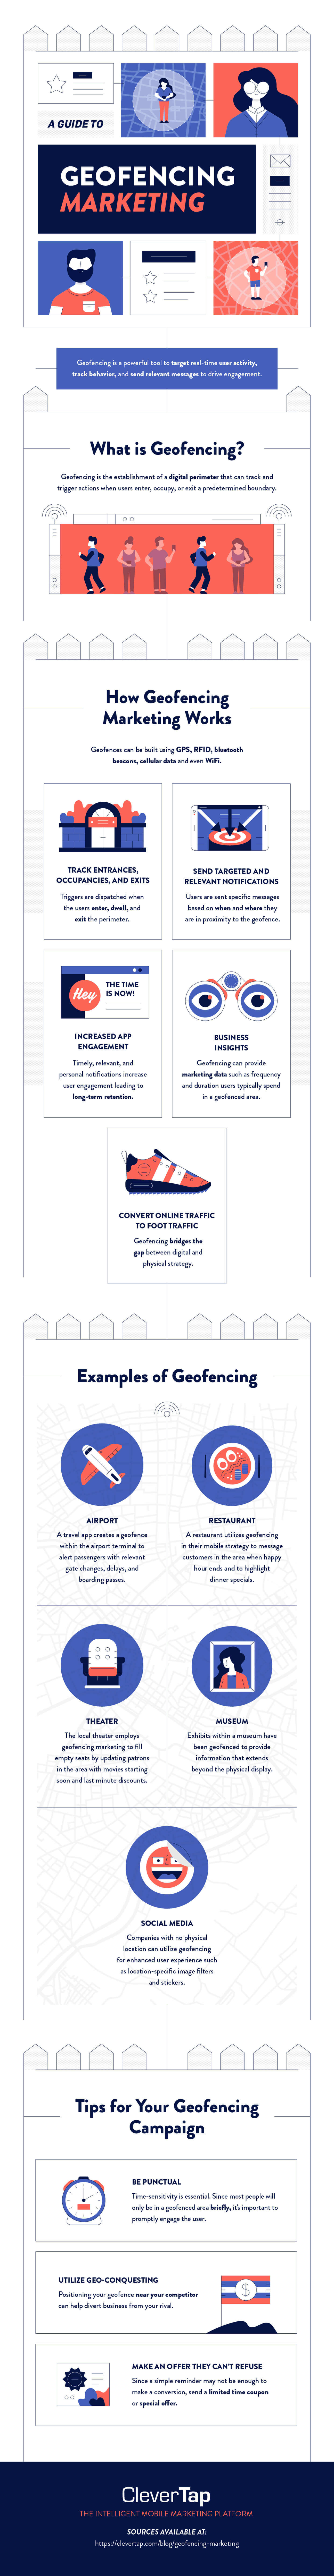 geofencing infographic with tips for mobile marketing